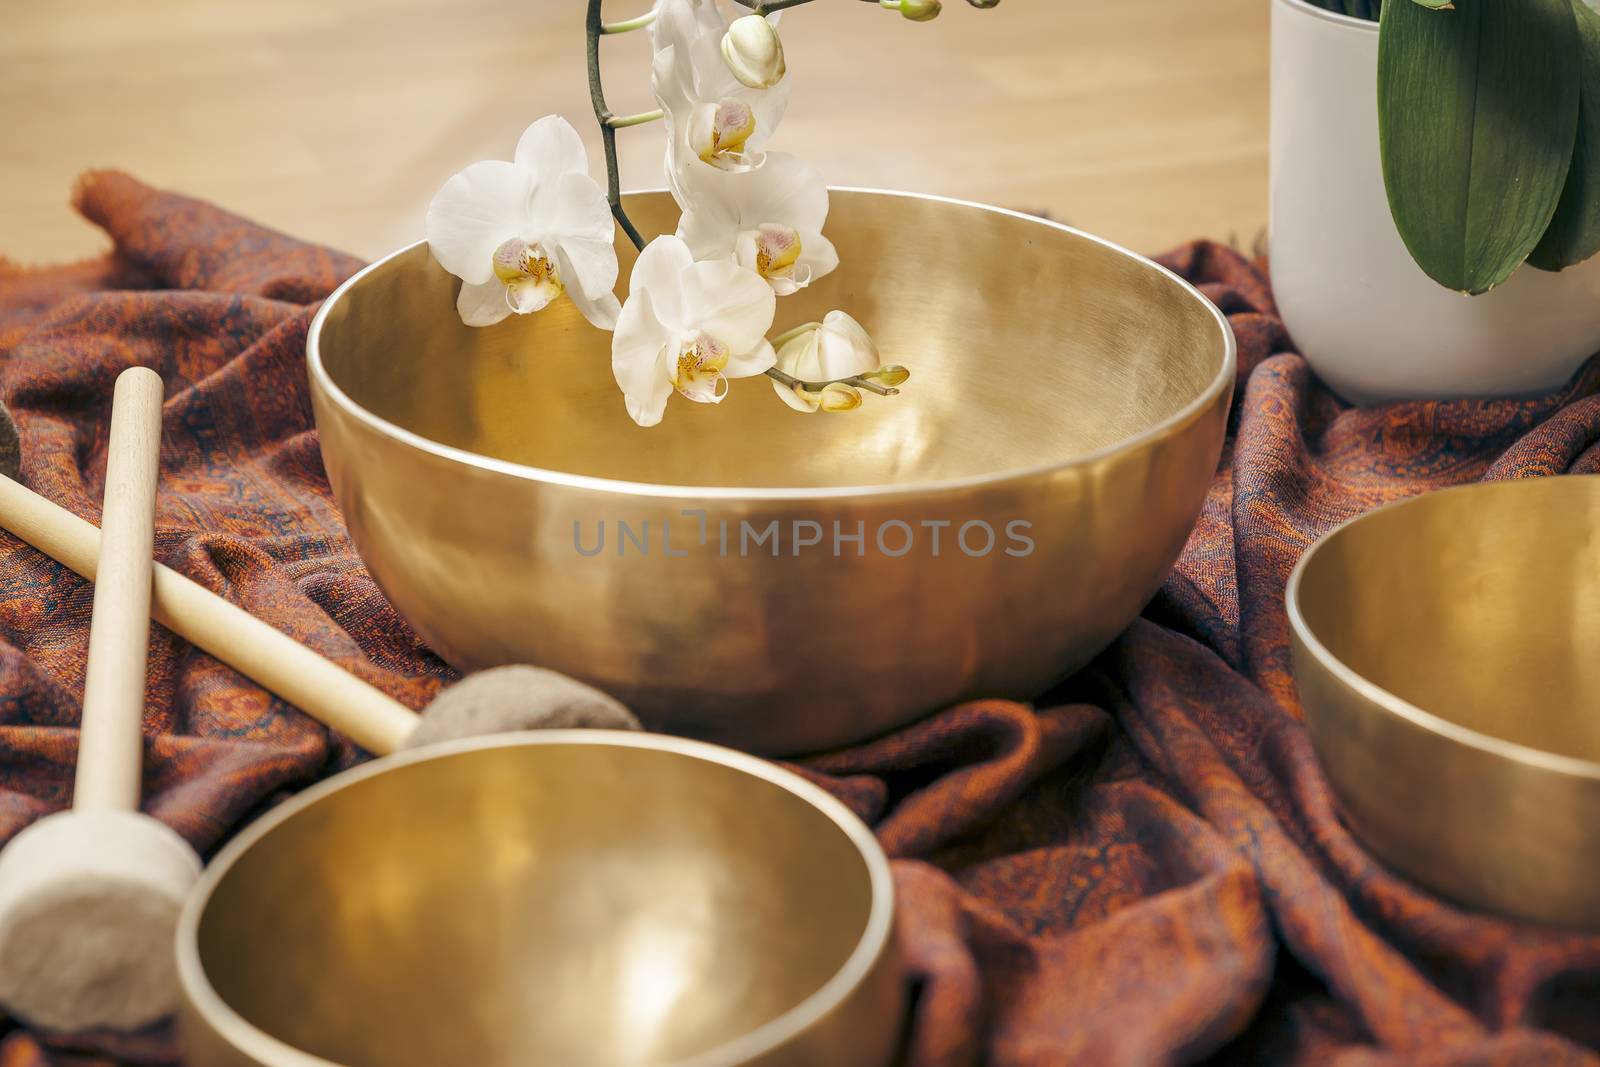 An image of some singing bowls and a white orchid